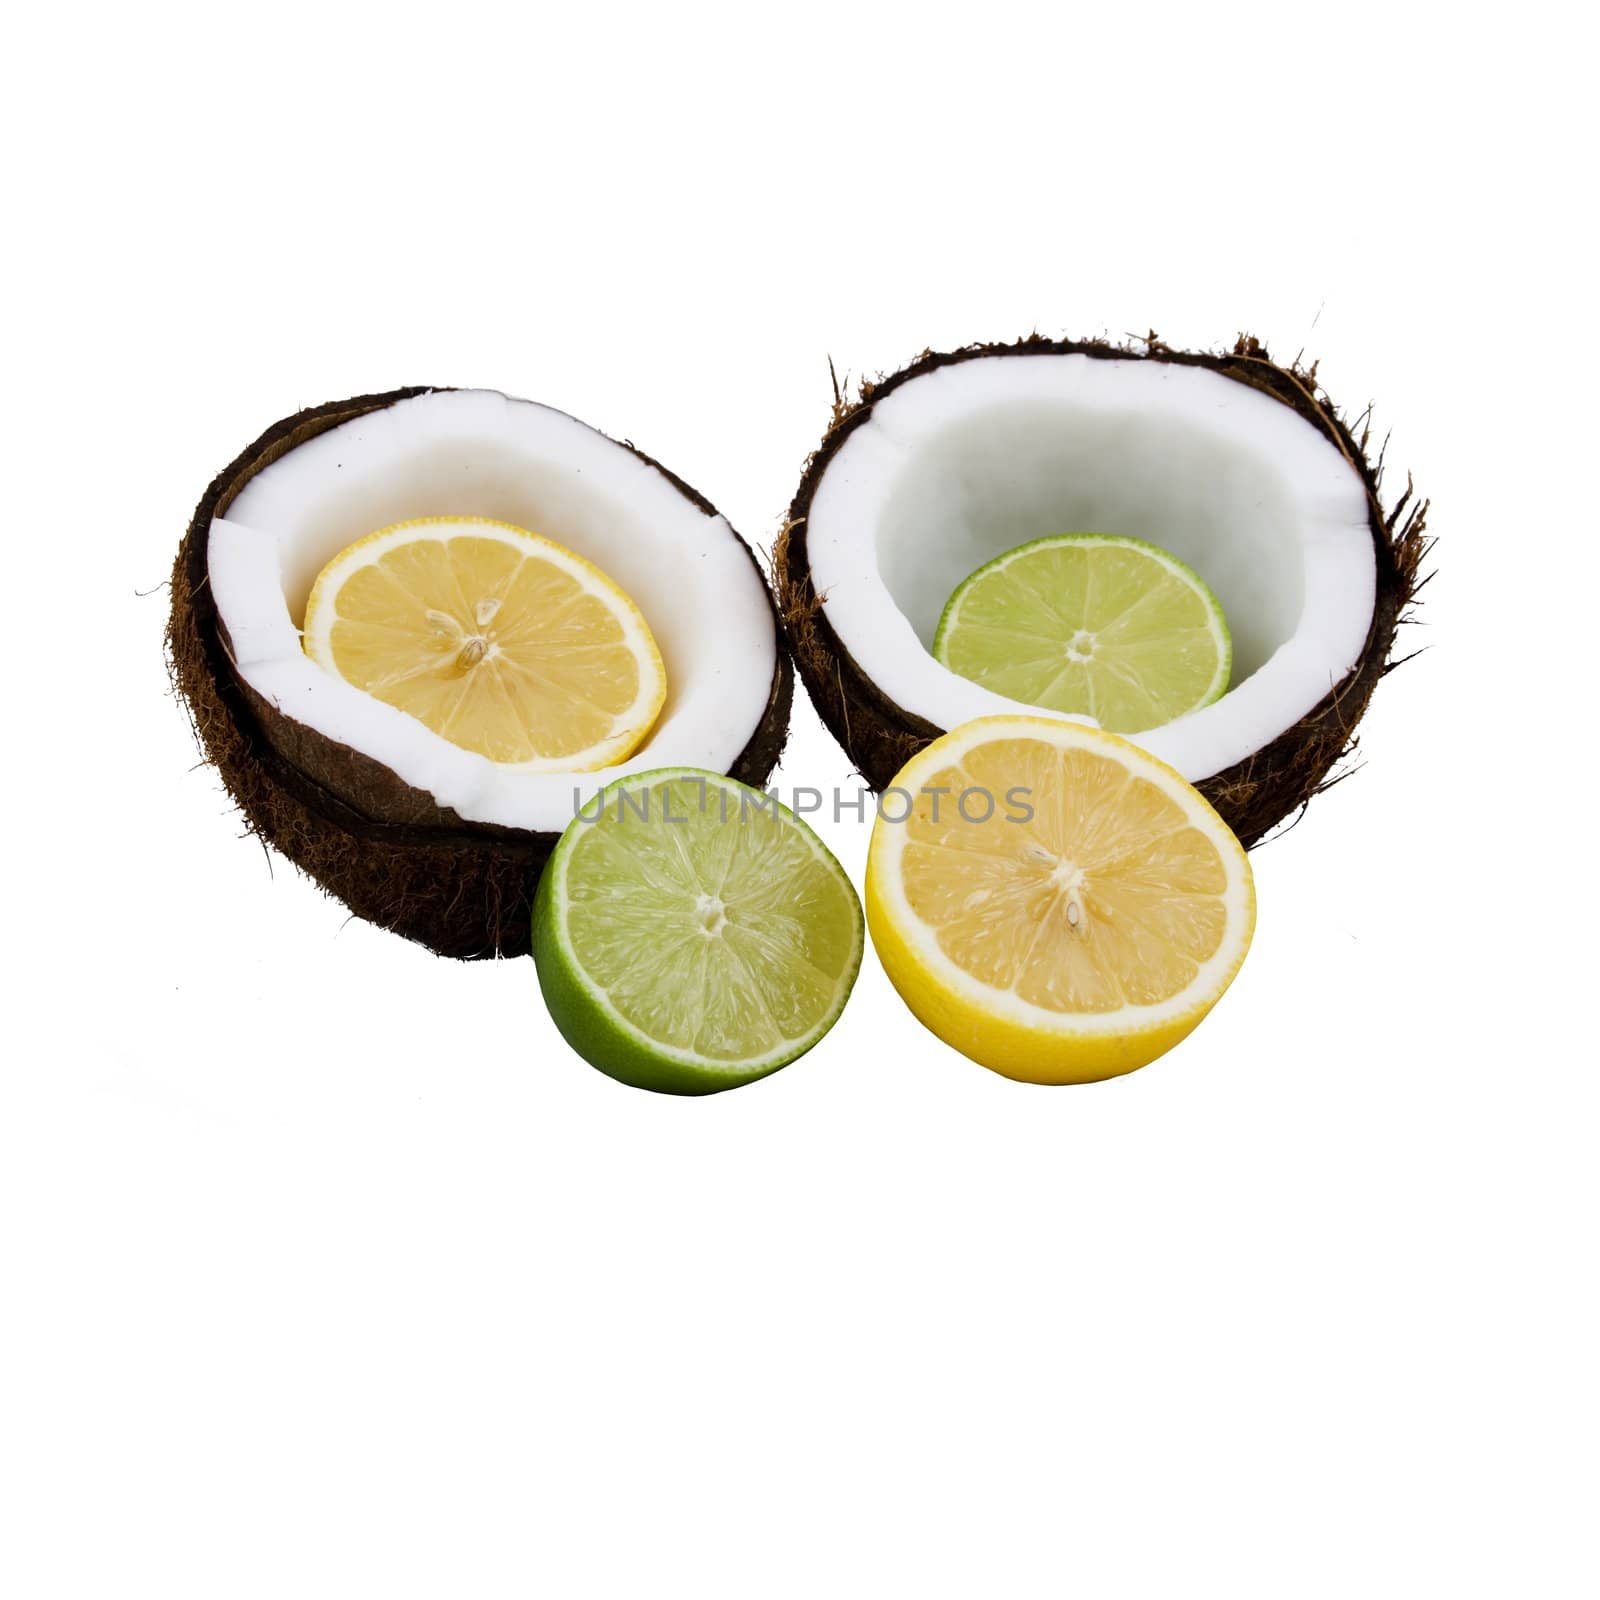 Lemon and lime cut in half placed in front of and inside a coconut that is split open  isolated on a white background